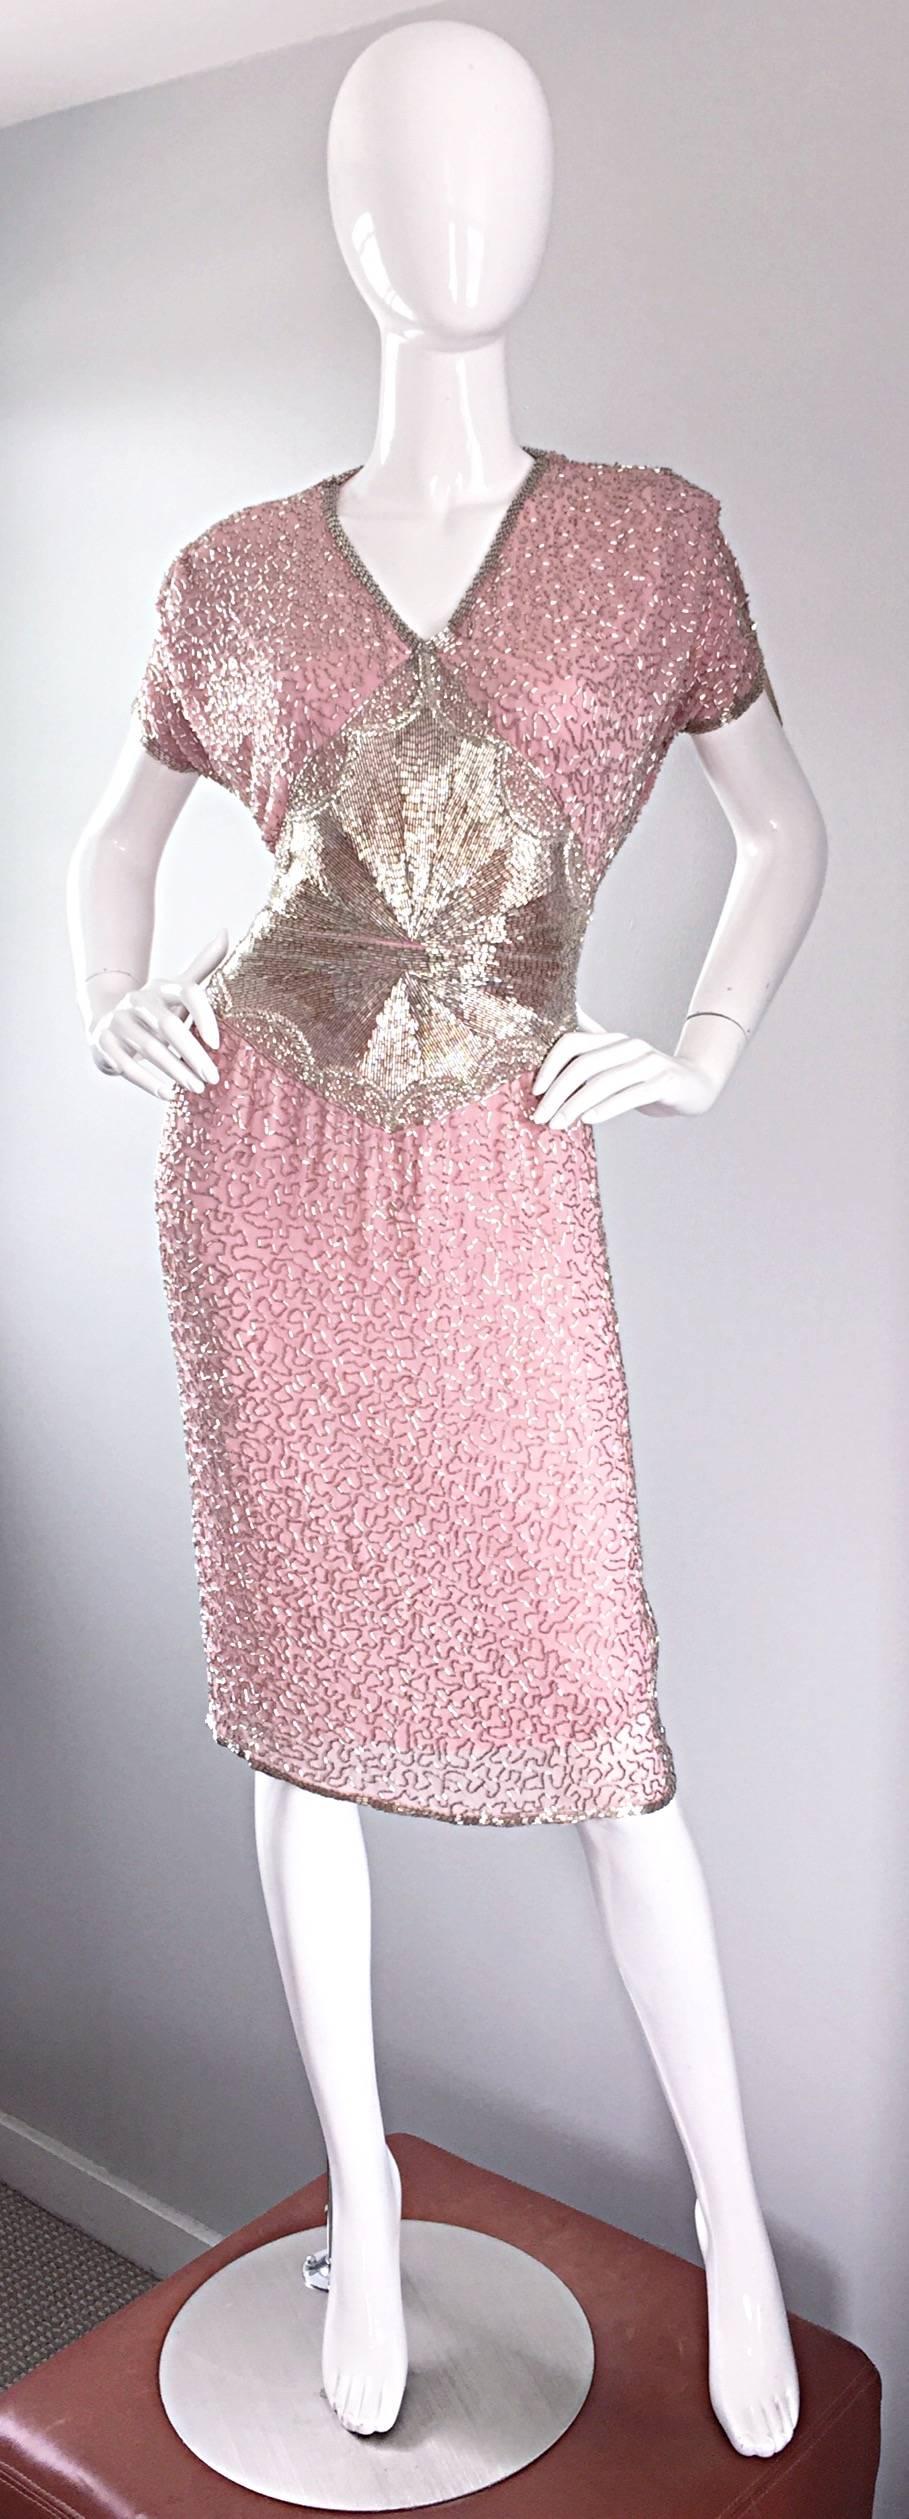 Gorgeous vintage OLEG CASSINI heavily beaded pink silk dress! Luxurious layers of pink silk and chiffon encrusted with thousands of hand-sewn silver beads. Absolutely stunning on! Drapes the body like a gem, and waist features slimming beadwork.